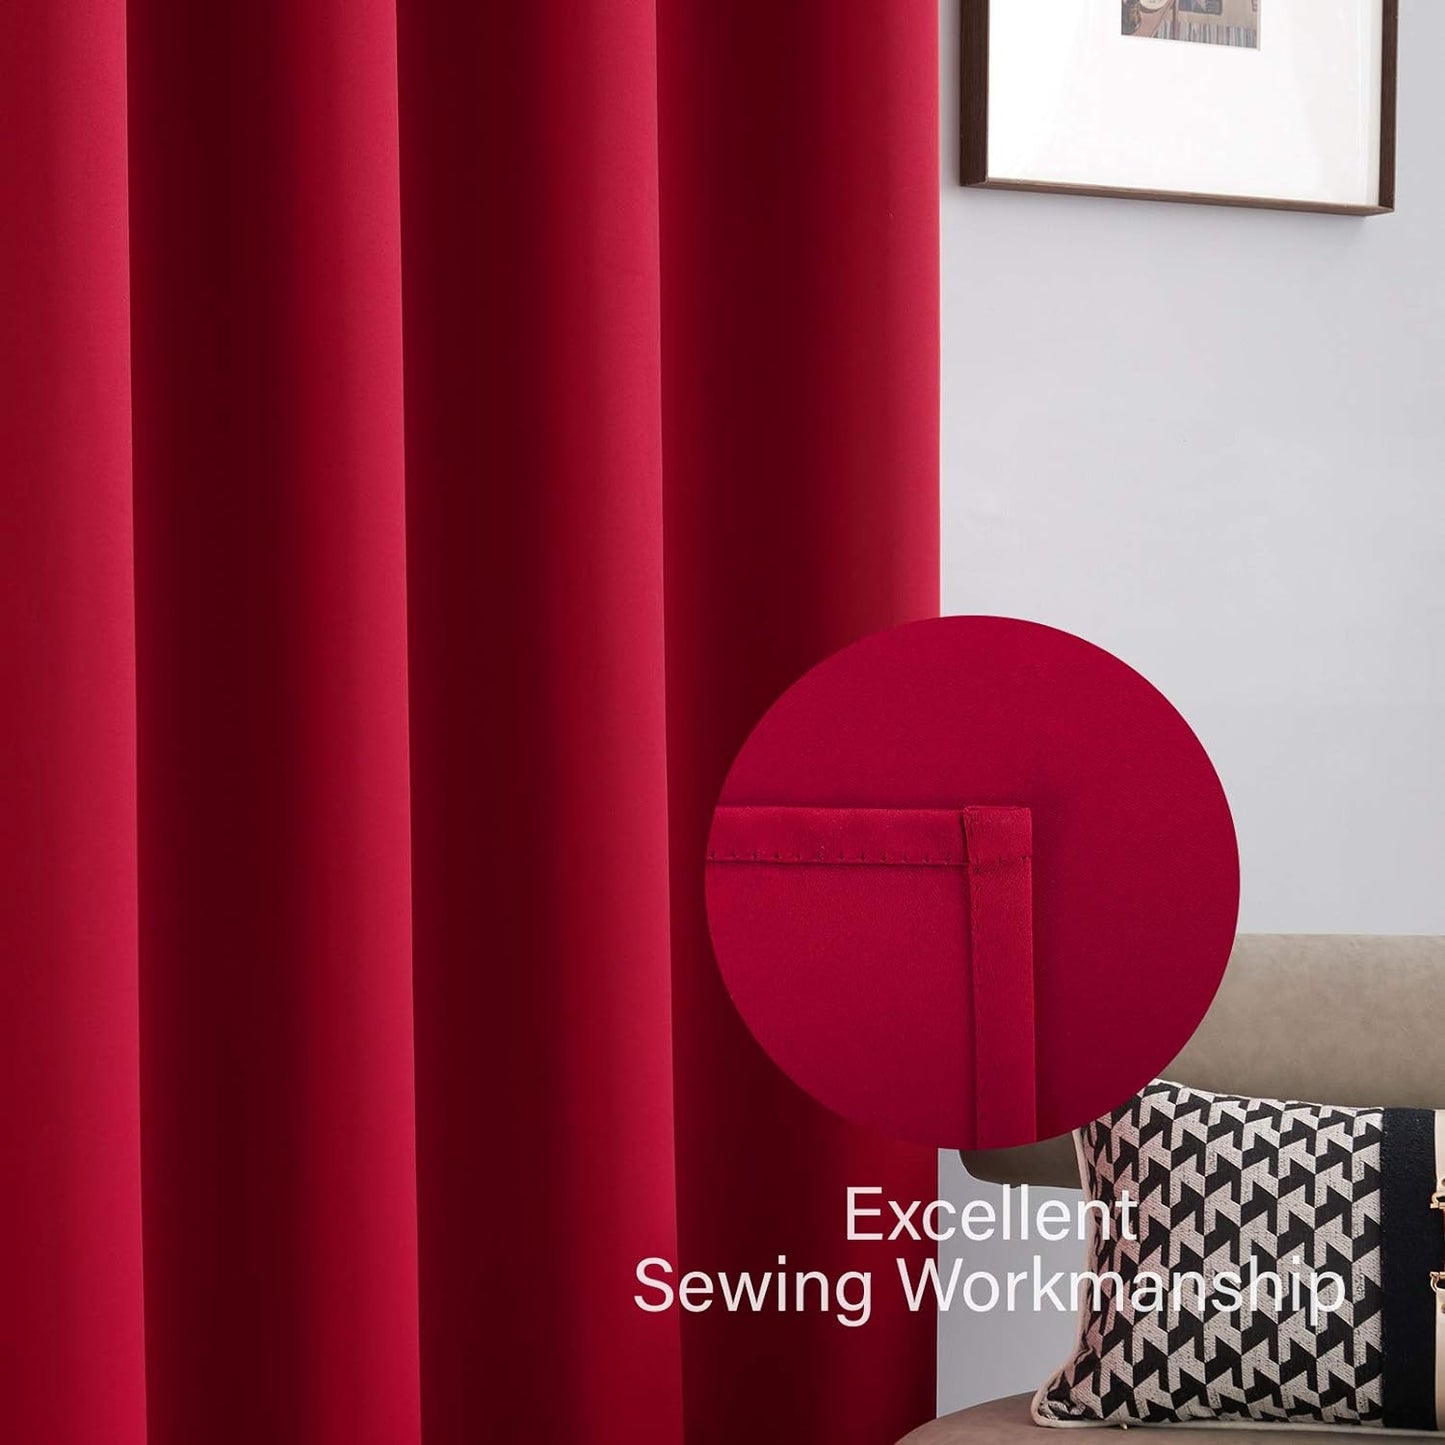 BERSWAY 99% Blackout Curtains & Drapes Panels 84 Inches Darkening Curtains - Thermal Insulated Curtain for Bedroom-Red 84 Inches Long Grommet Window Curtain 2 Panels Set,W 52" X L 84"  BERSWAY   